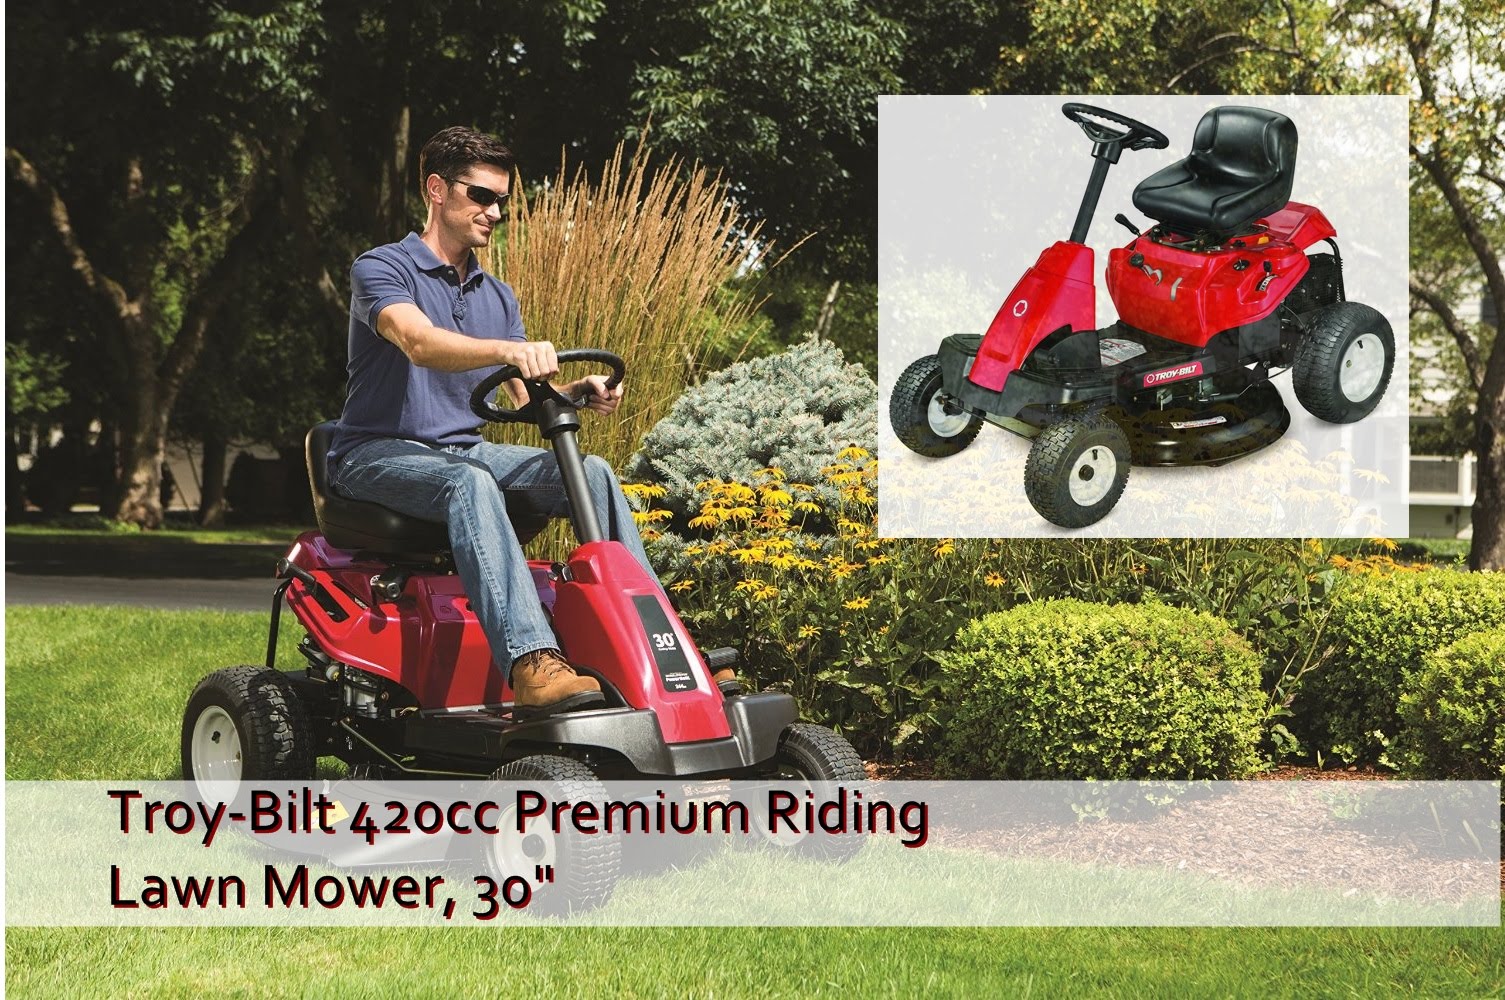 How to mow lawn riding mower